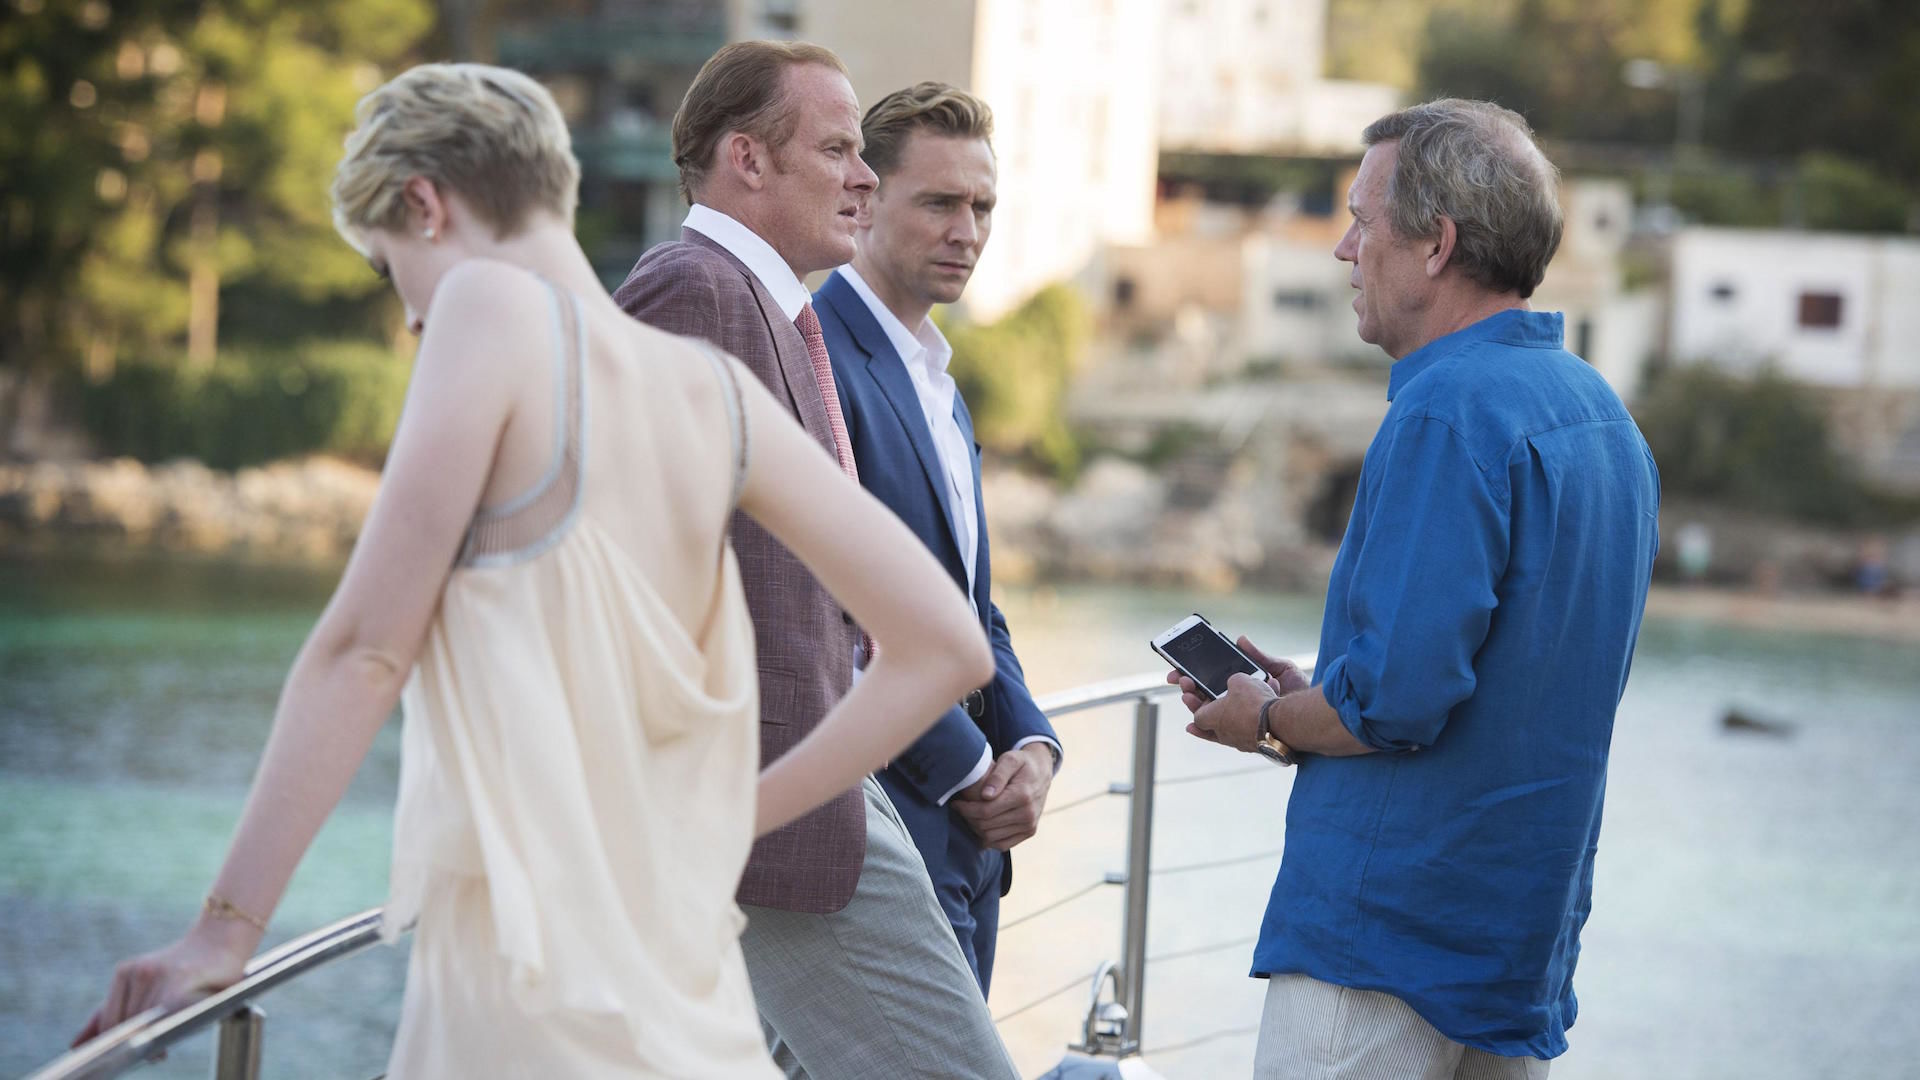 The Night Manager S1E4 Episode 4